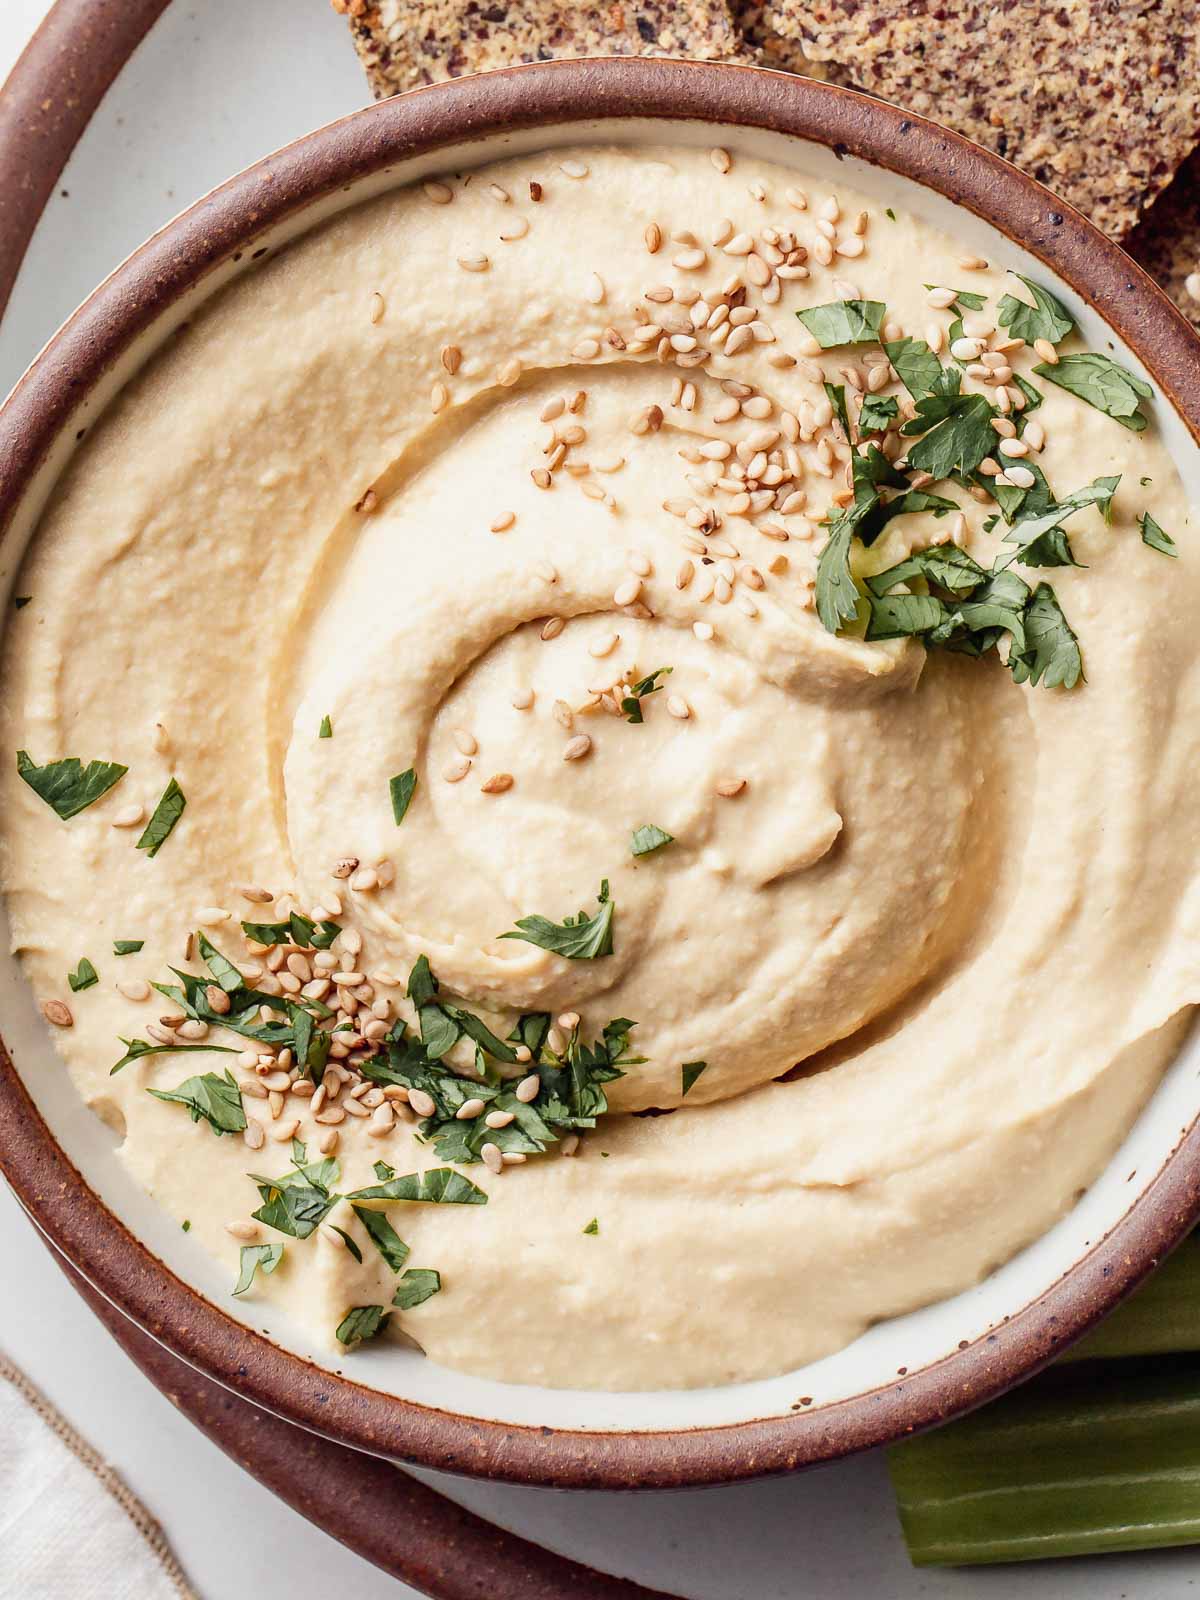 Oil free hummus in a bowl with sesame seeds on top.